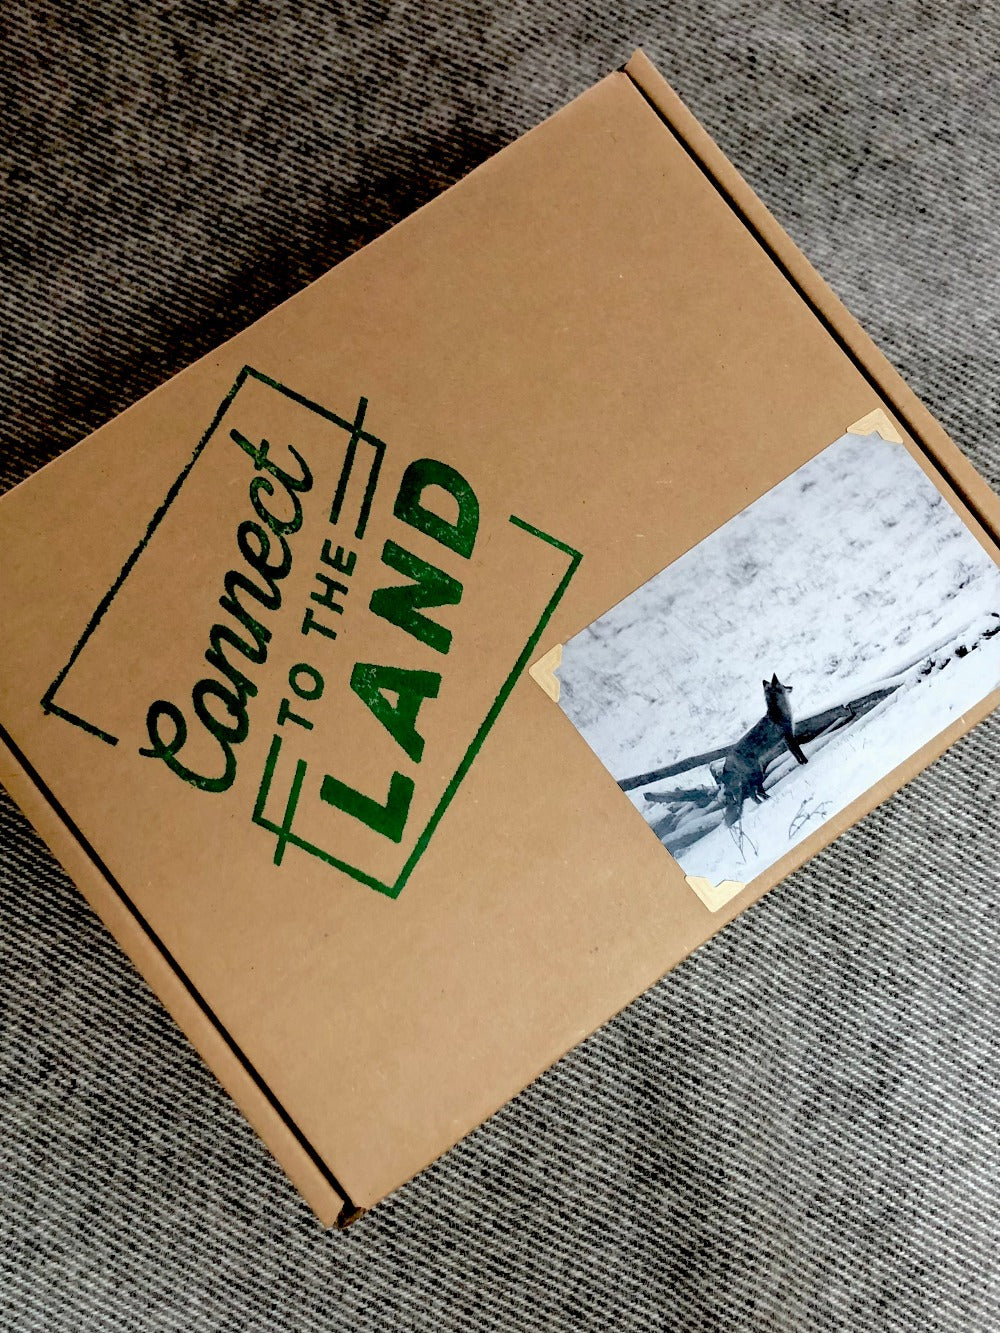 Topsy Farms' Connect to the Land winter trails box